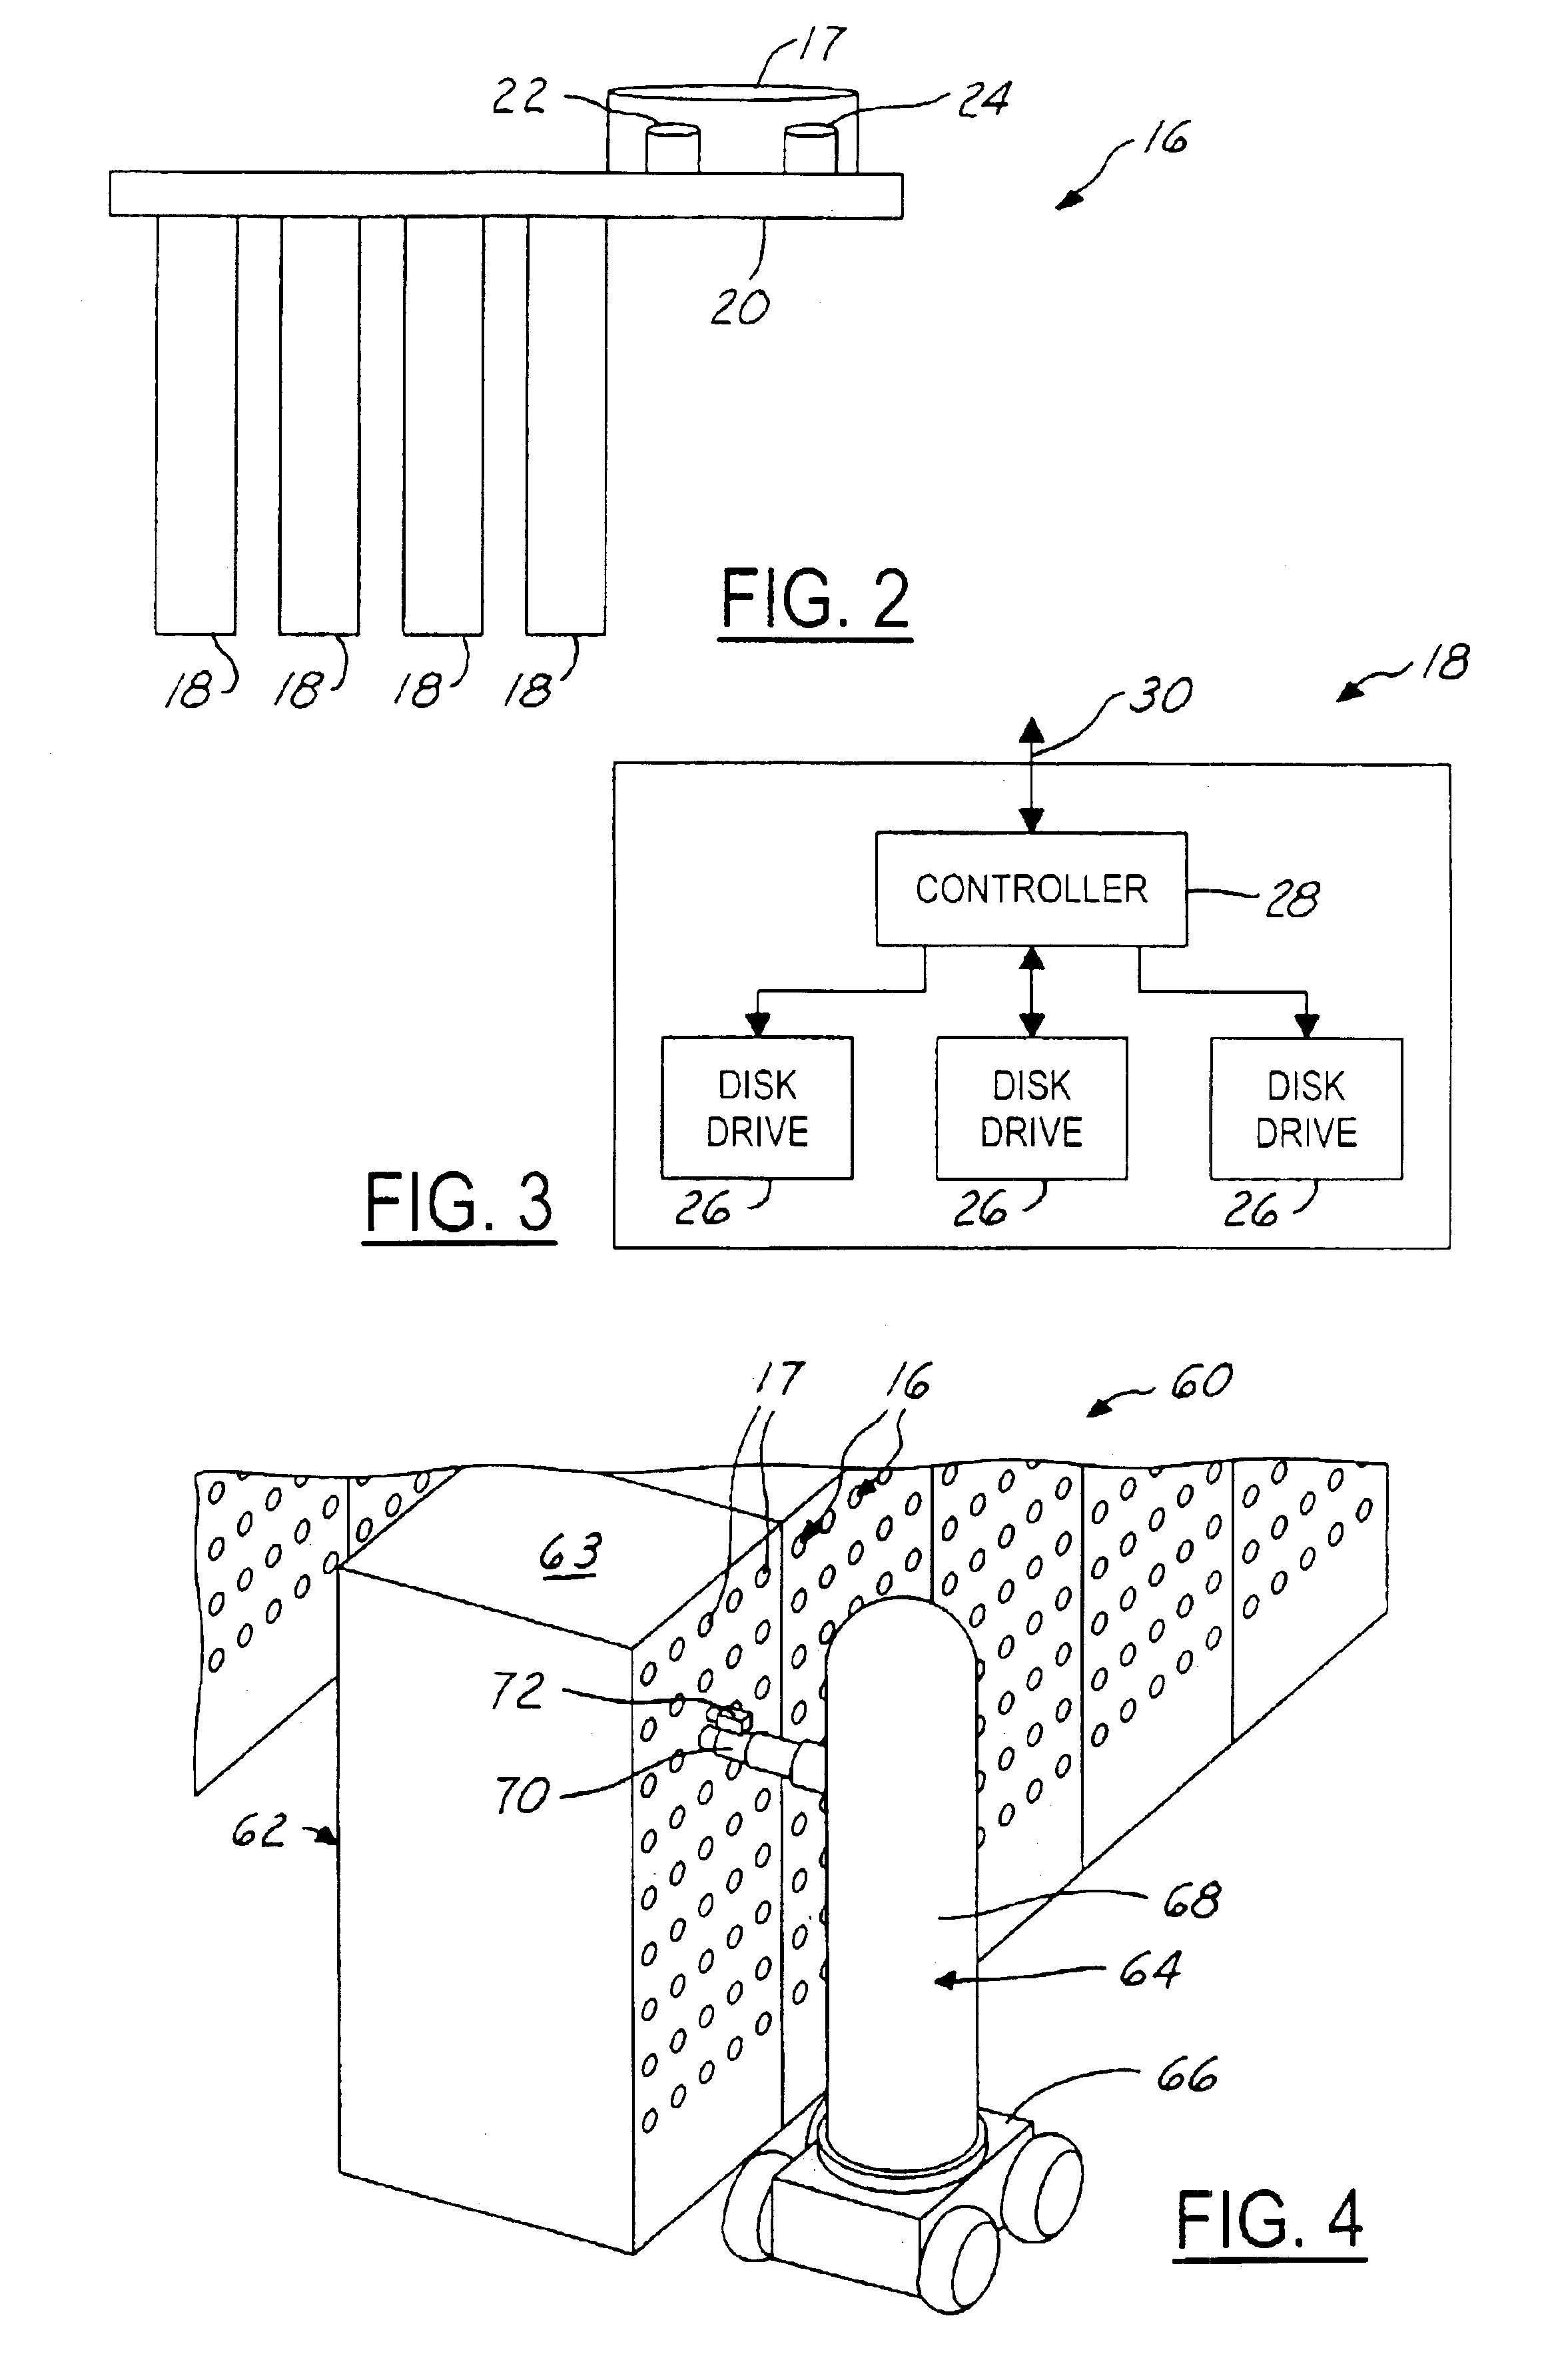 Data library system having movable robotic librarian operable for accessing statically mounted drives